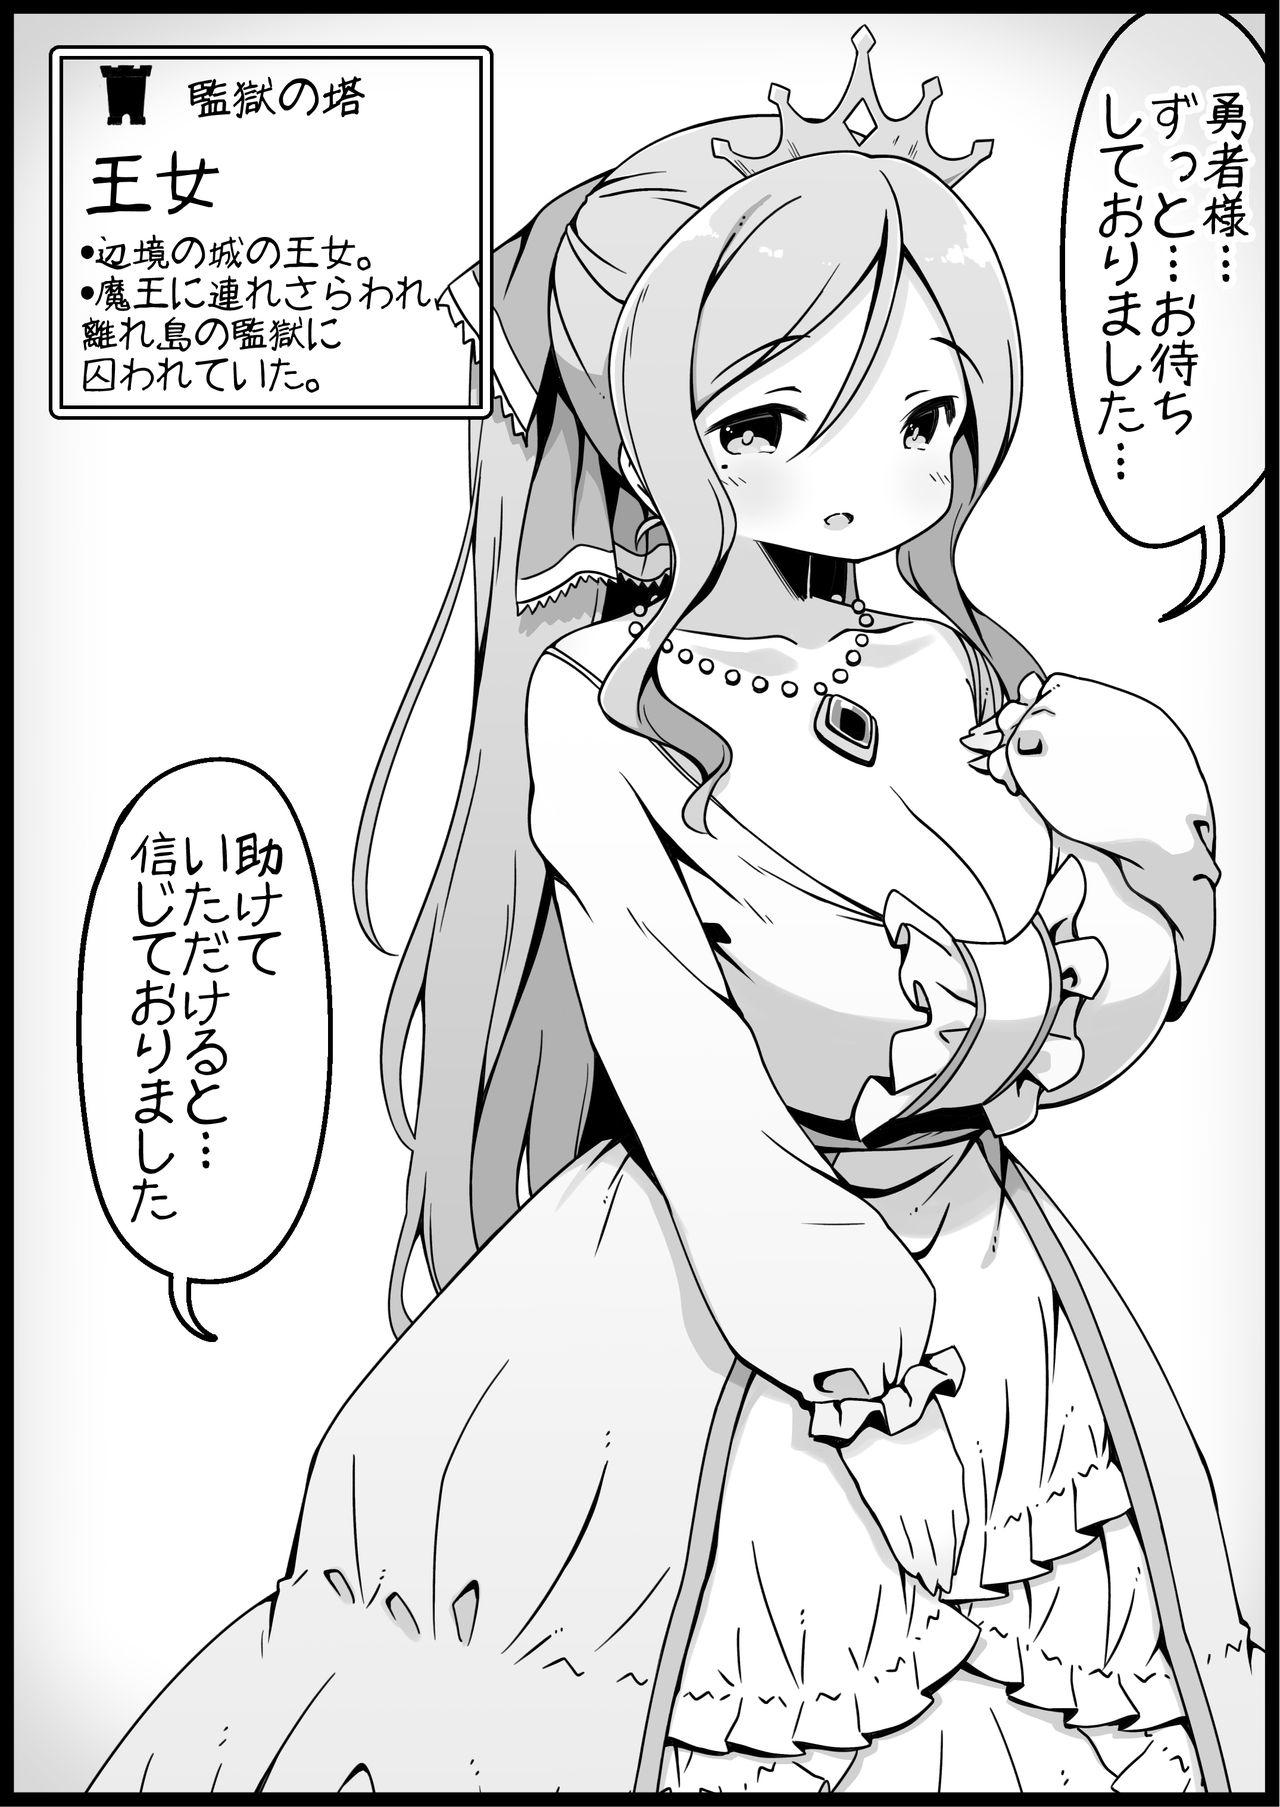 [Succubus Egg] Fantasy World 2 Too Forgiving to Heroes-Continued NPC (mob) Opponent-Centered Short H Manga Collection- 23